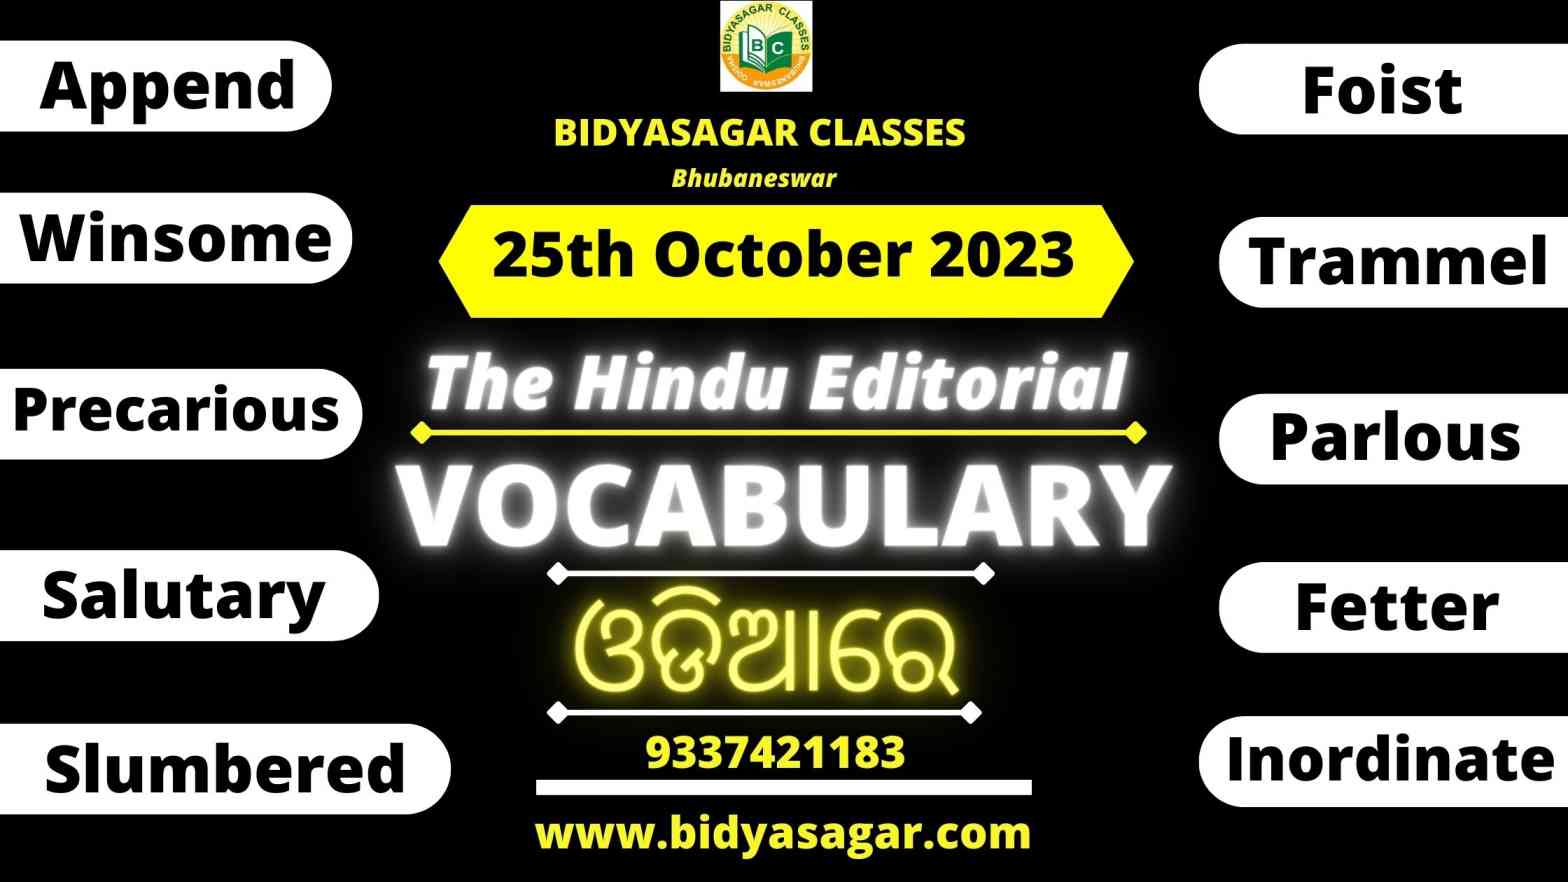 The Hindu Editorial Vocabulary of 25th October 2023